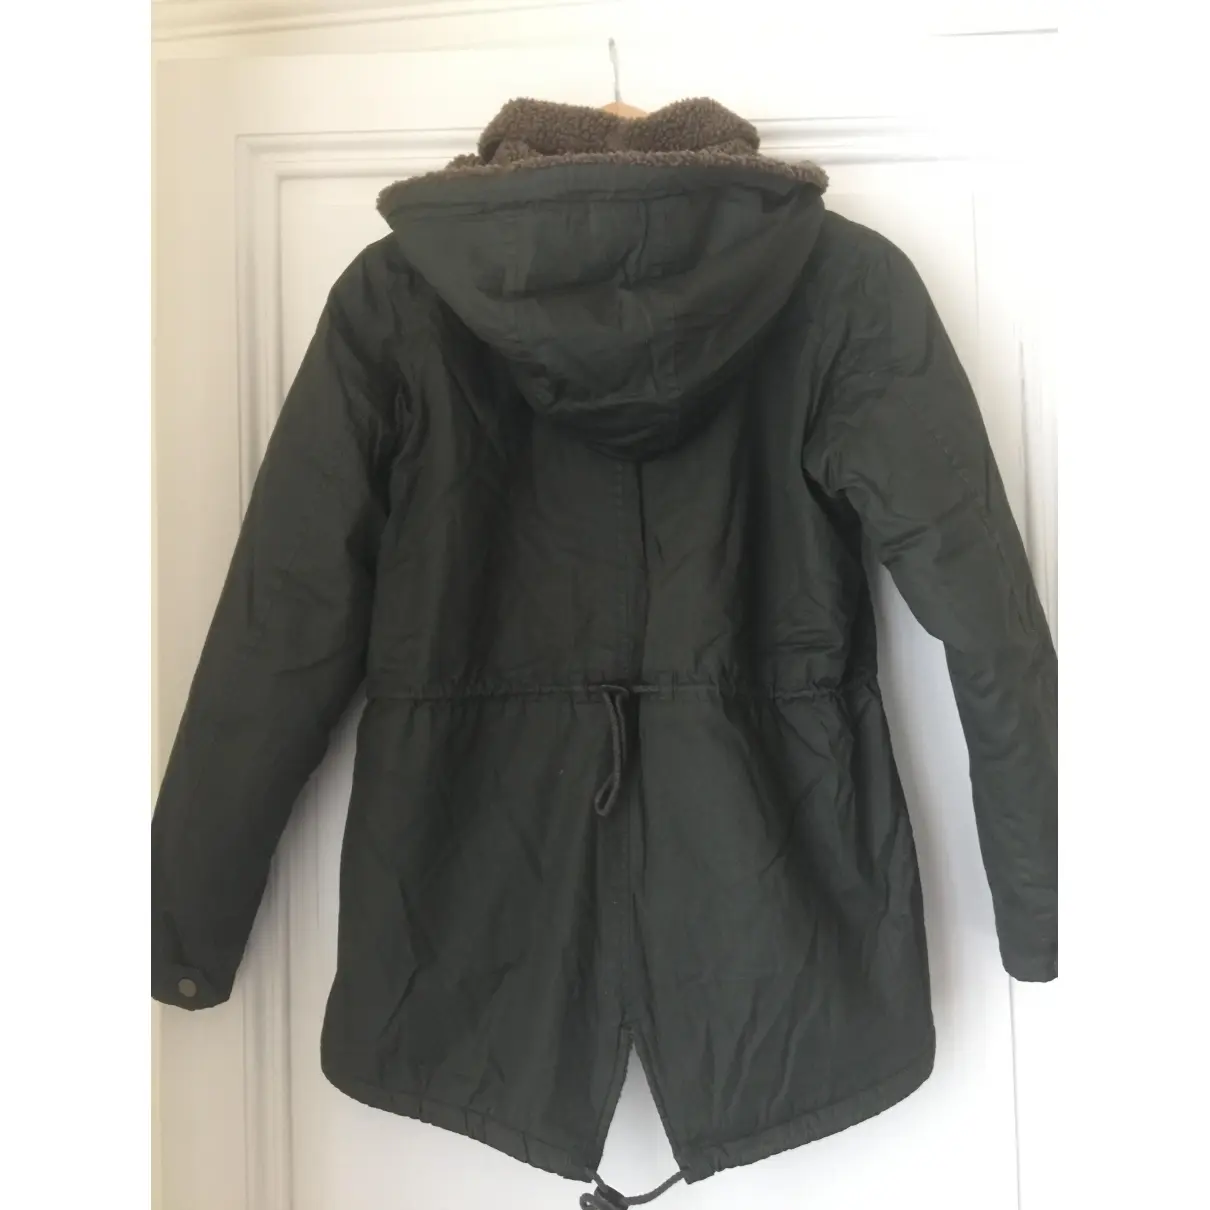 American Outfitters Jacket for sale